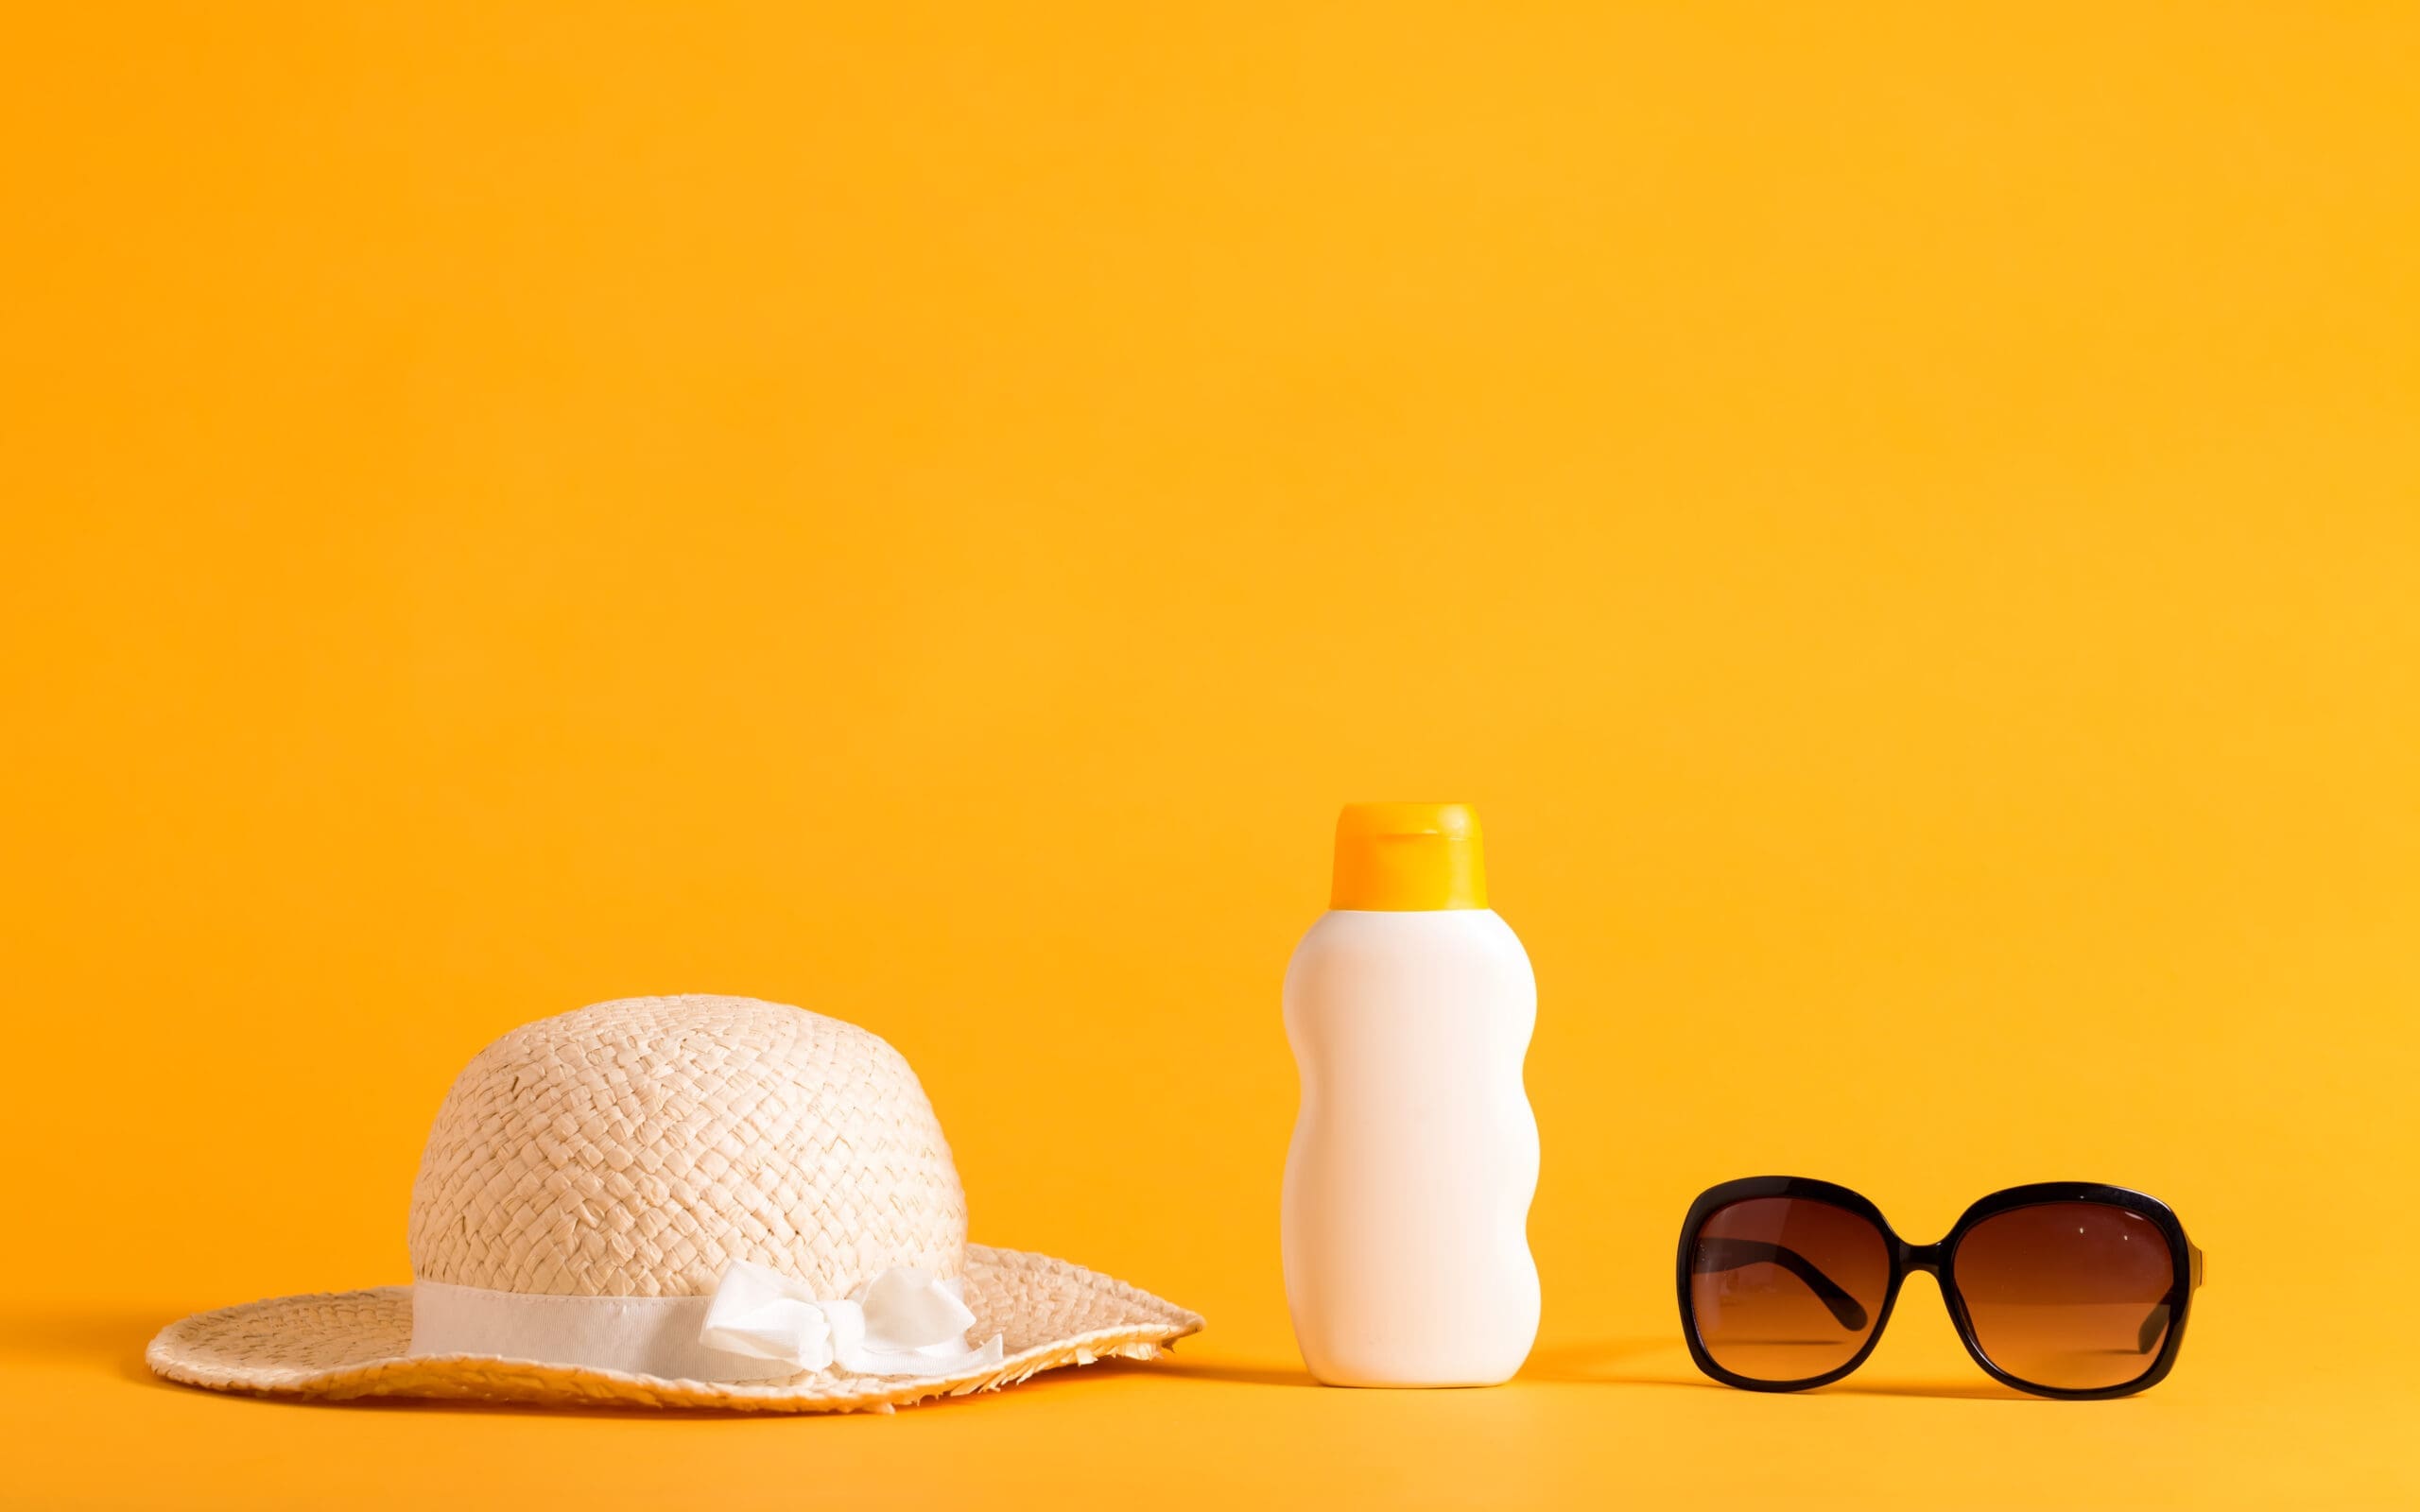 Exercise Sun Safety and Protect your Skin!